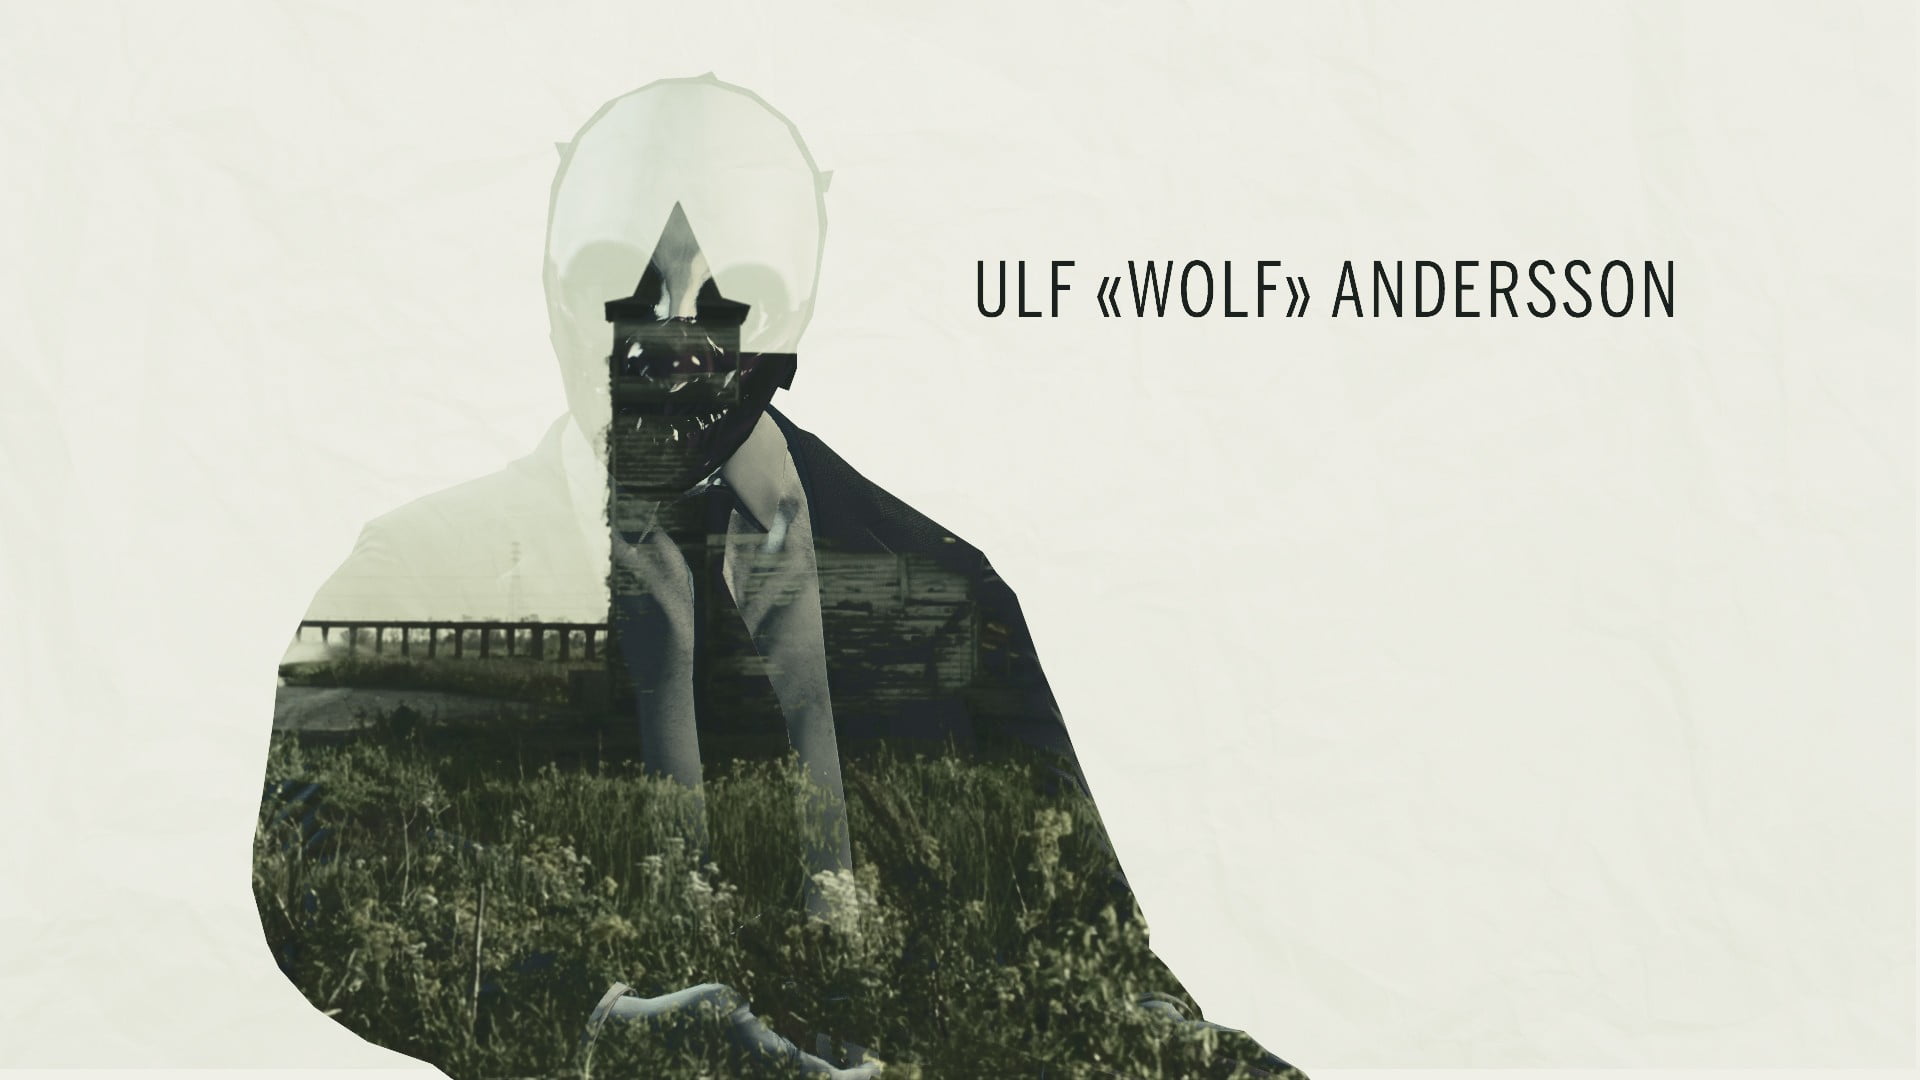 Andersson template, video games, Payday 2, Payday: The Heist, wolf